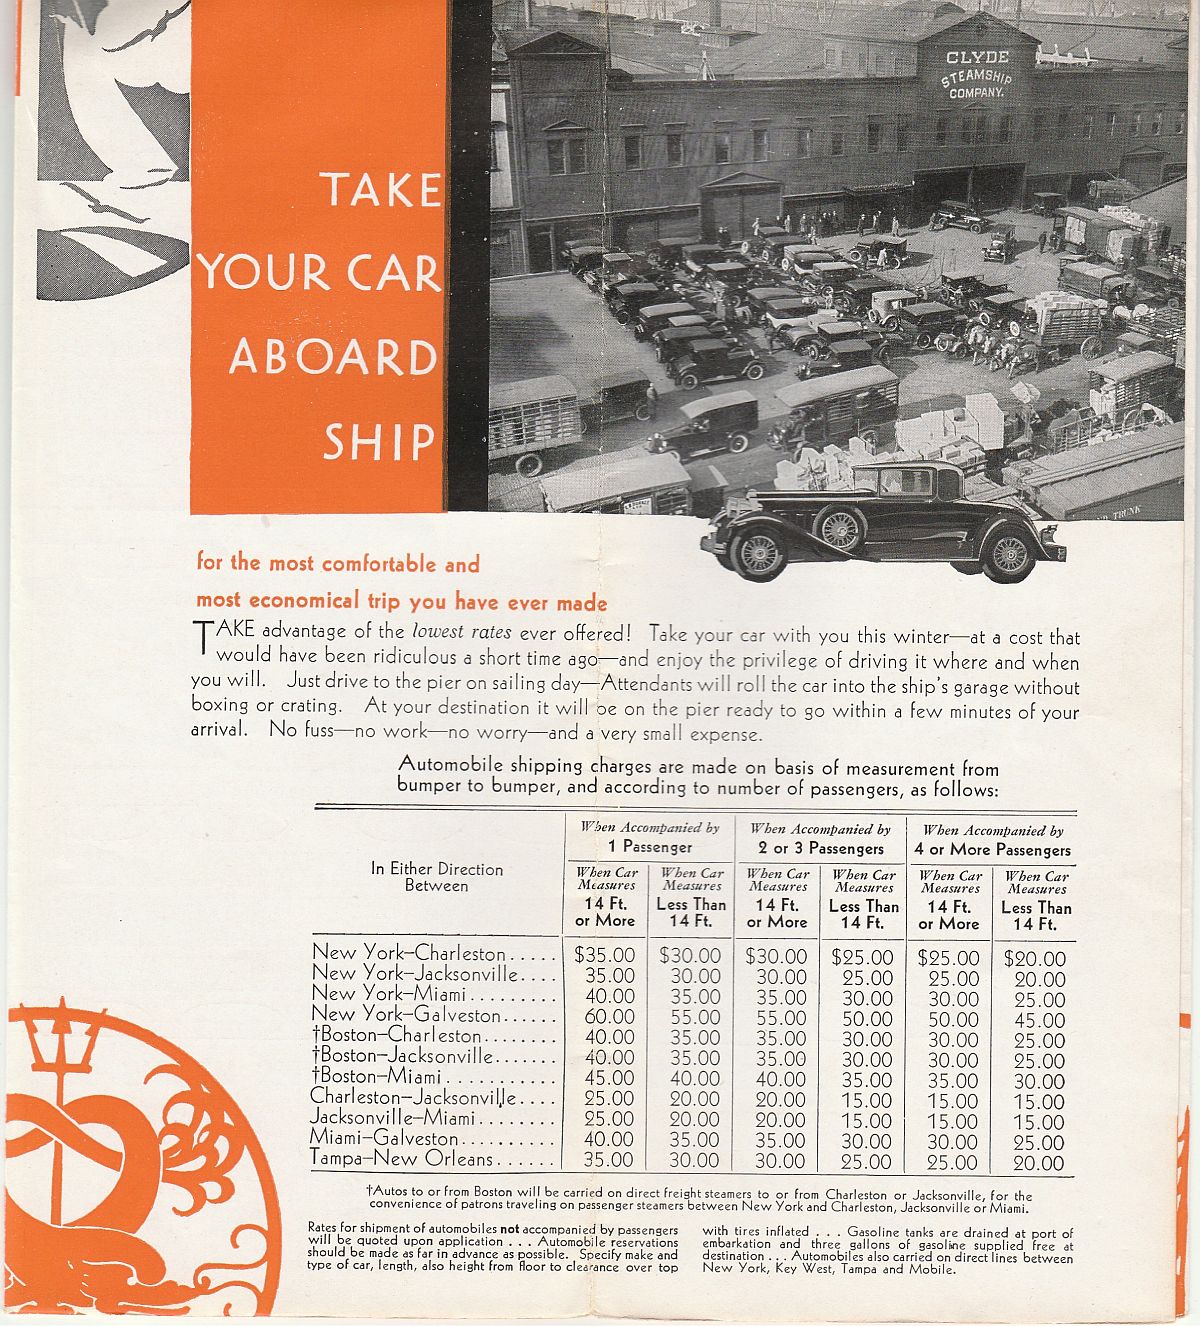 Clyde-Mallory Lines Take your car aboard ship: For the most comfortable and most economical trip you have ever made